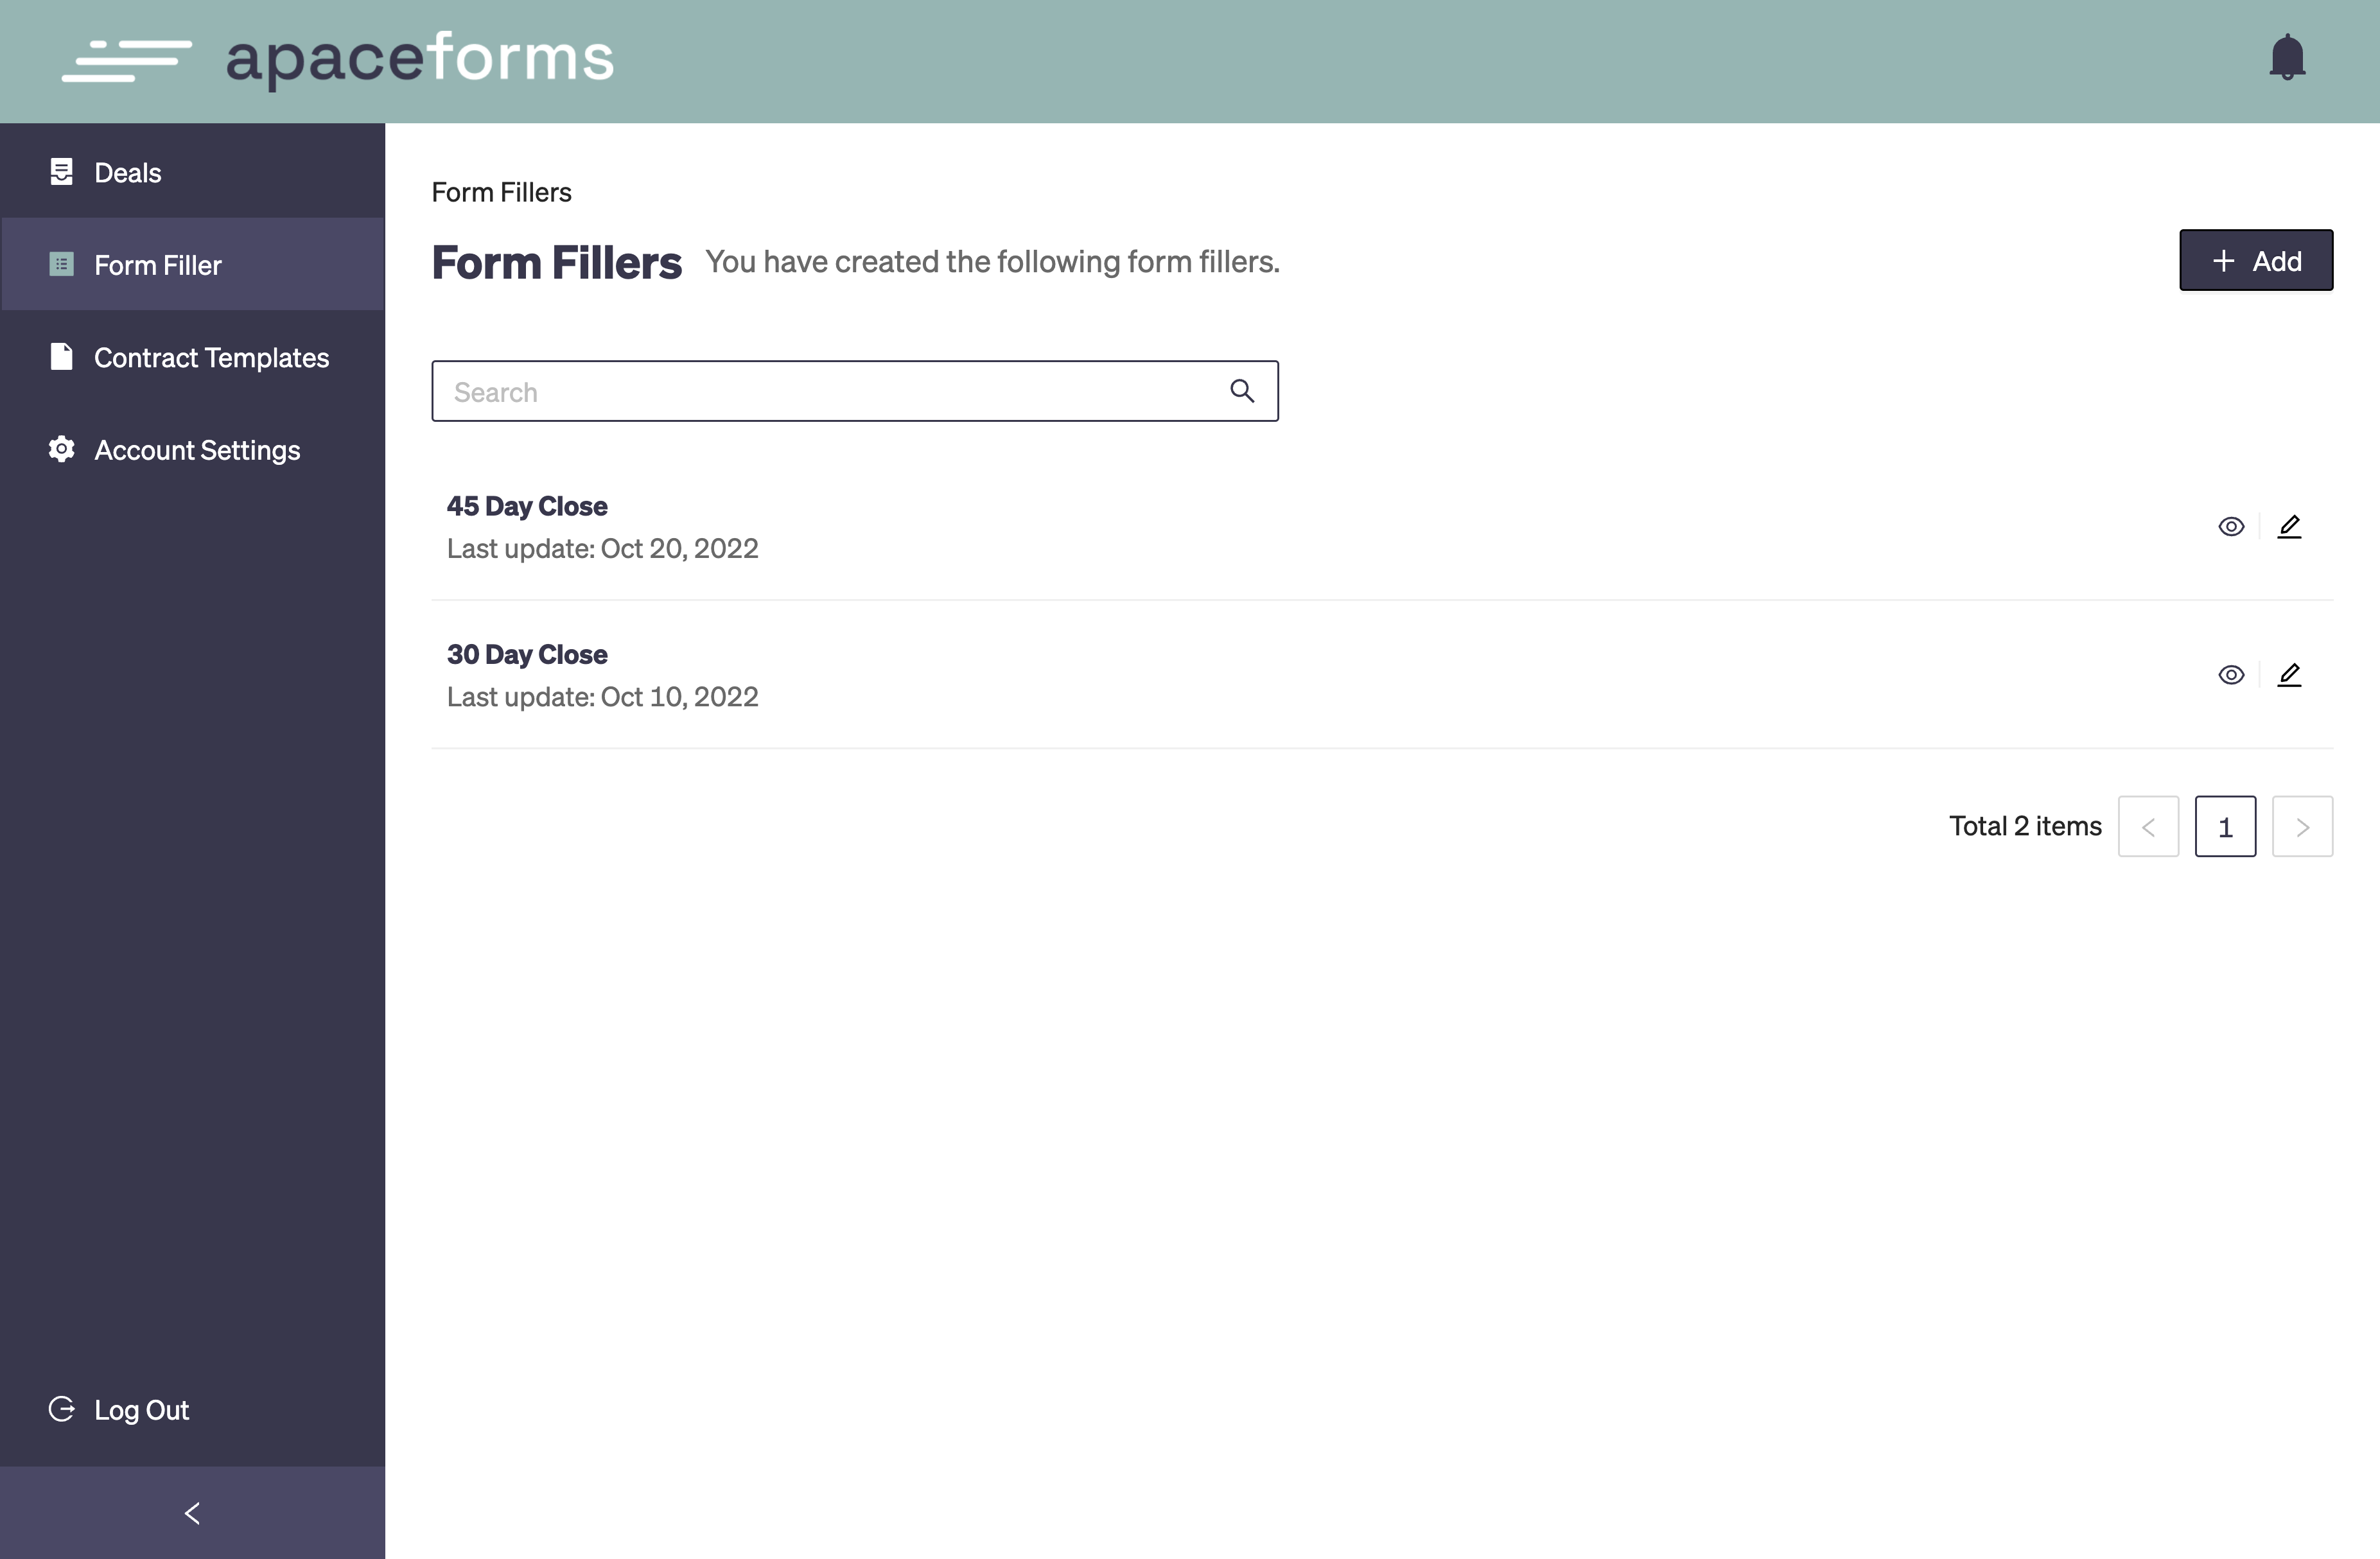 Once you arrive at your dashboard, you can view previously saved Form Fillers, or create new ones. Lets create a new one by clicking here